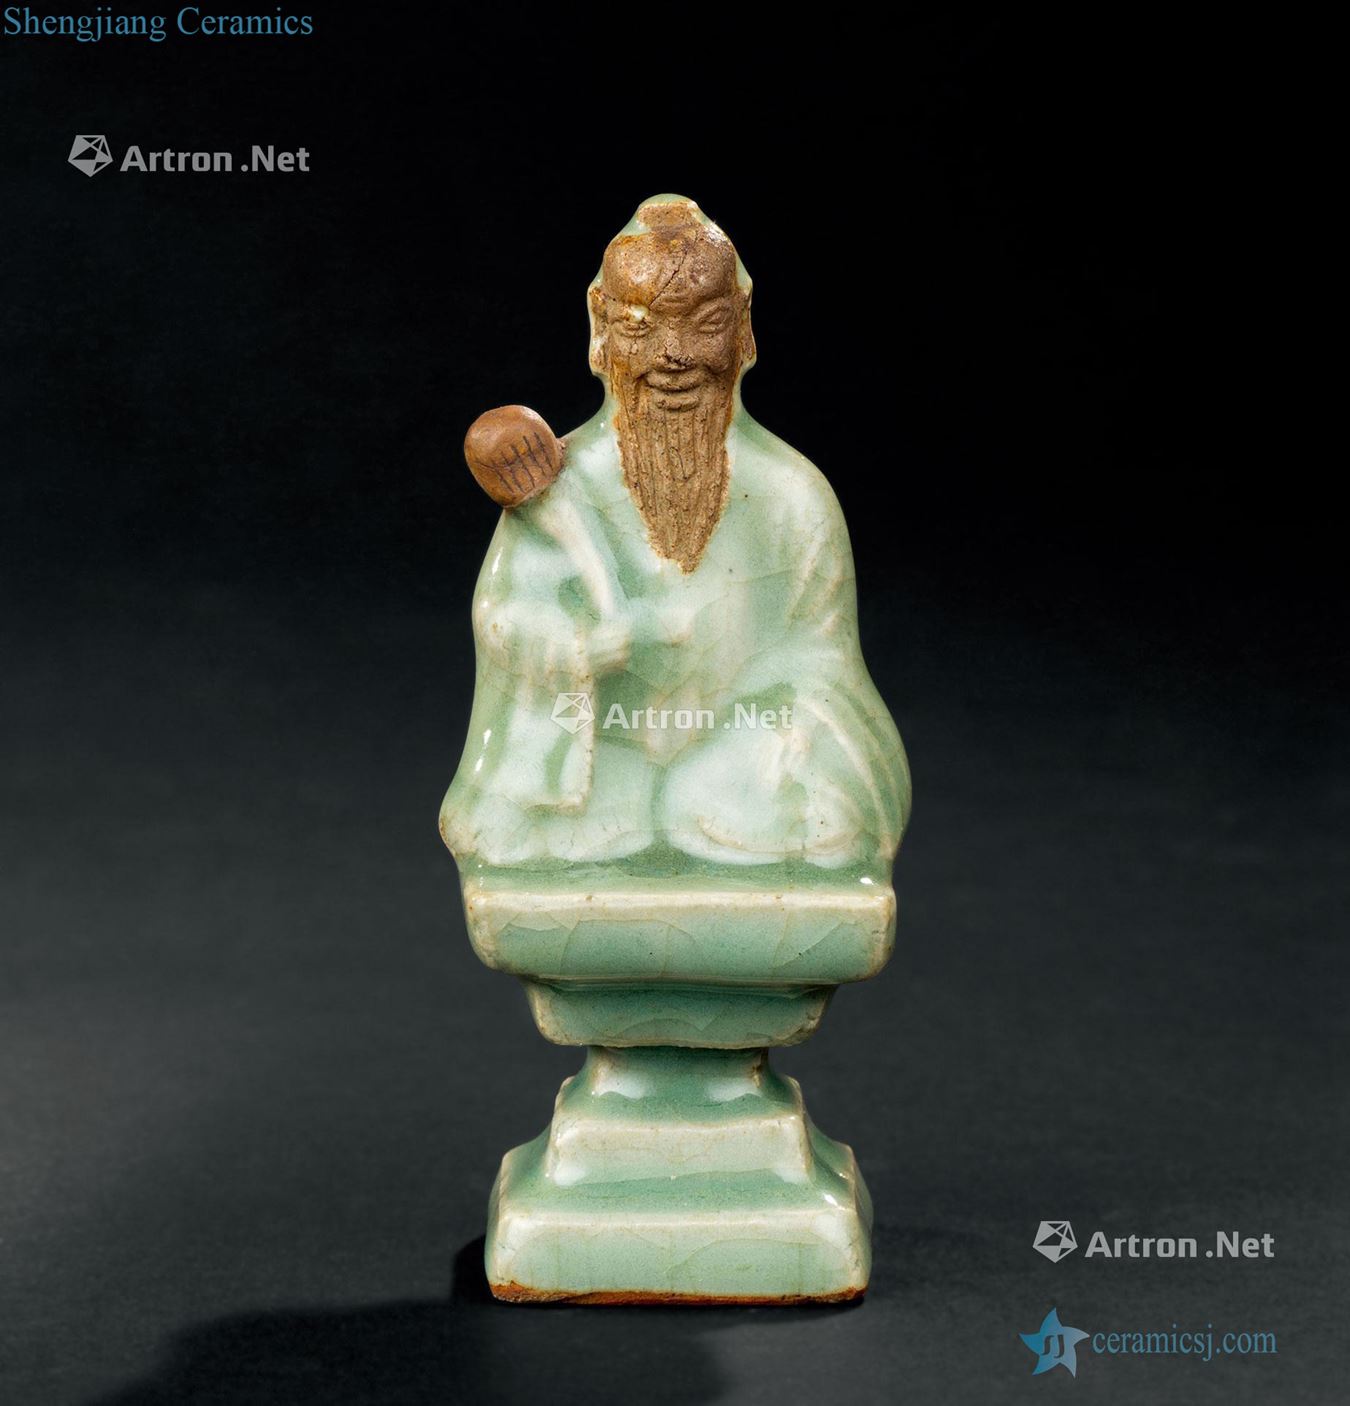 In the Ming dynasty (1368-1644), longquan celadon Taoism fairy